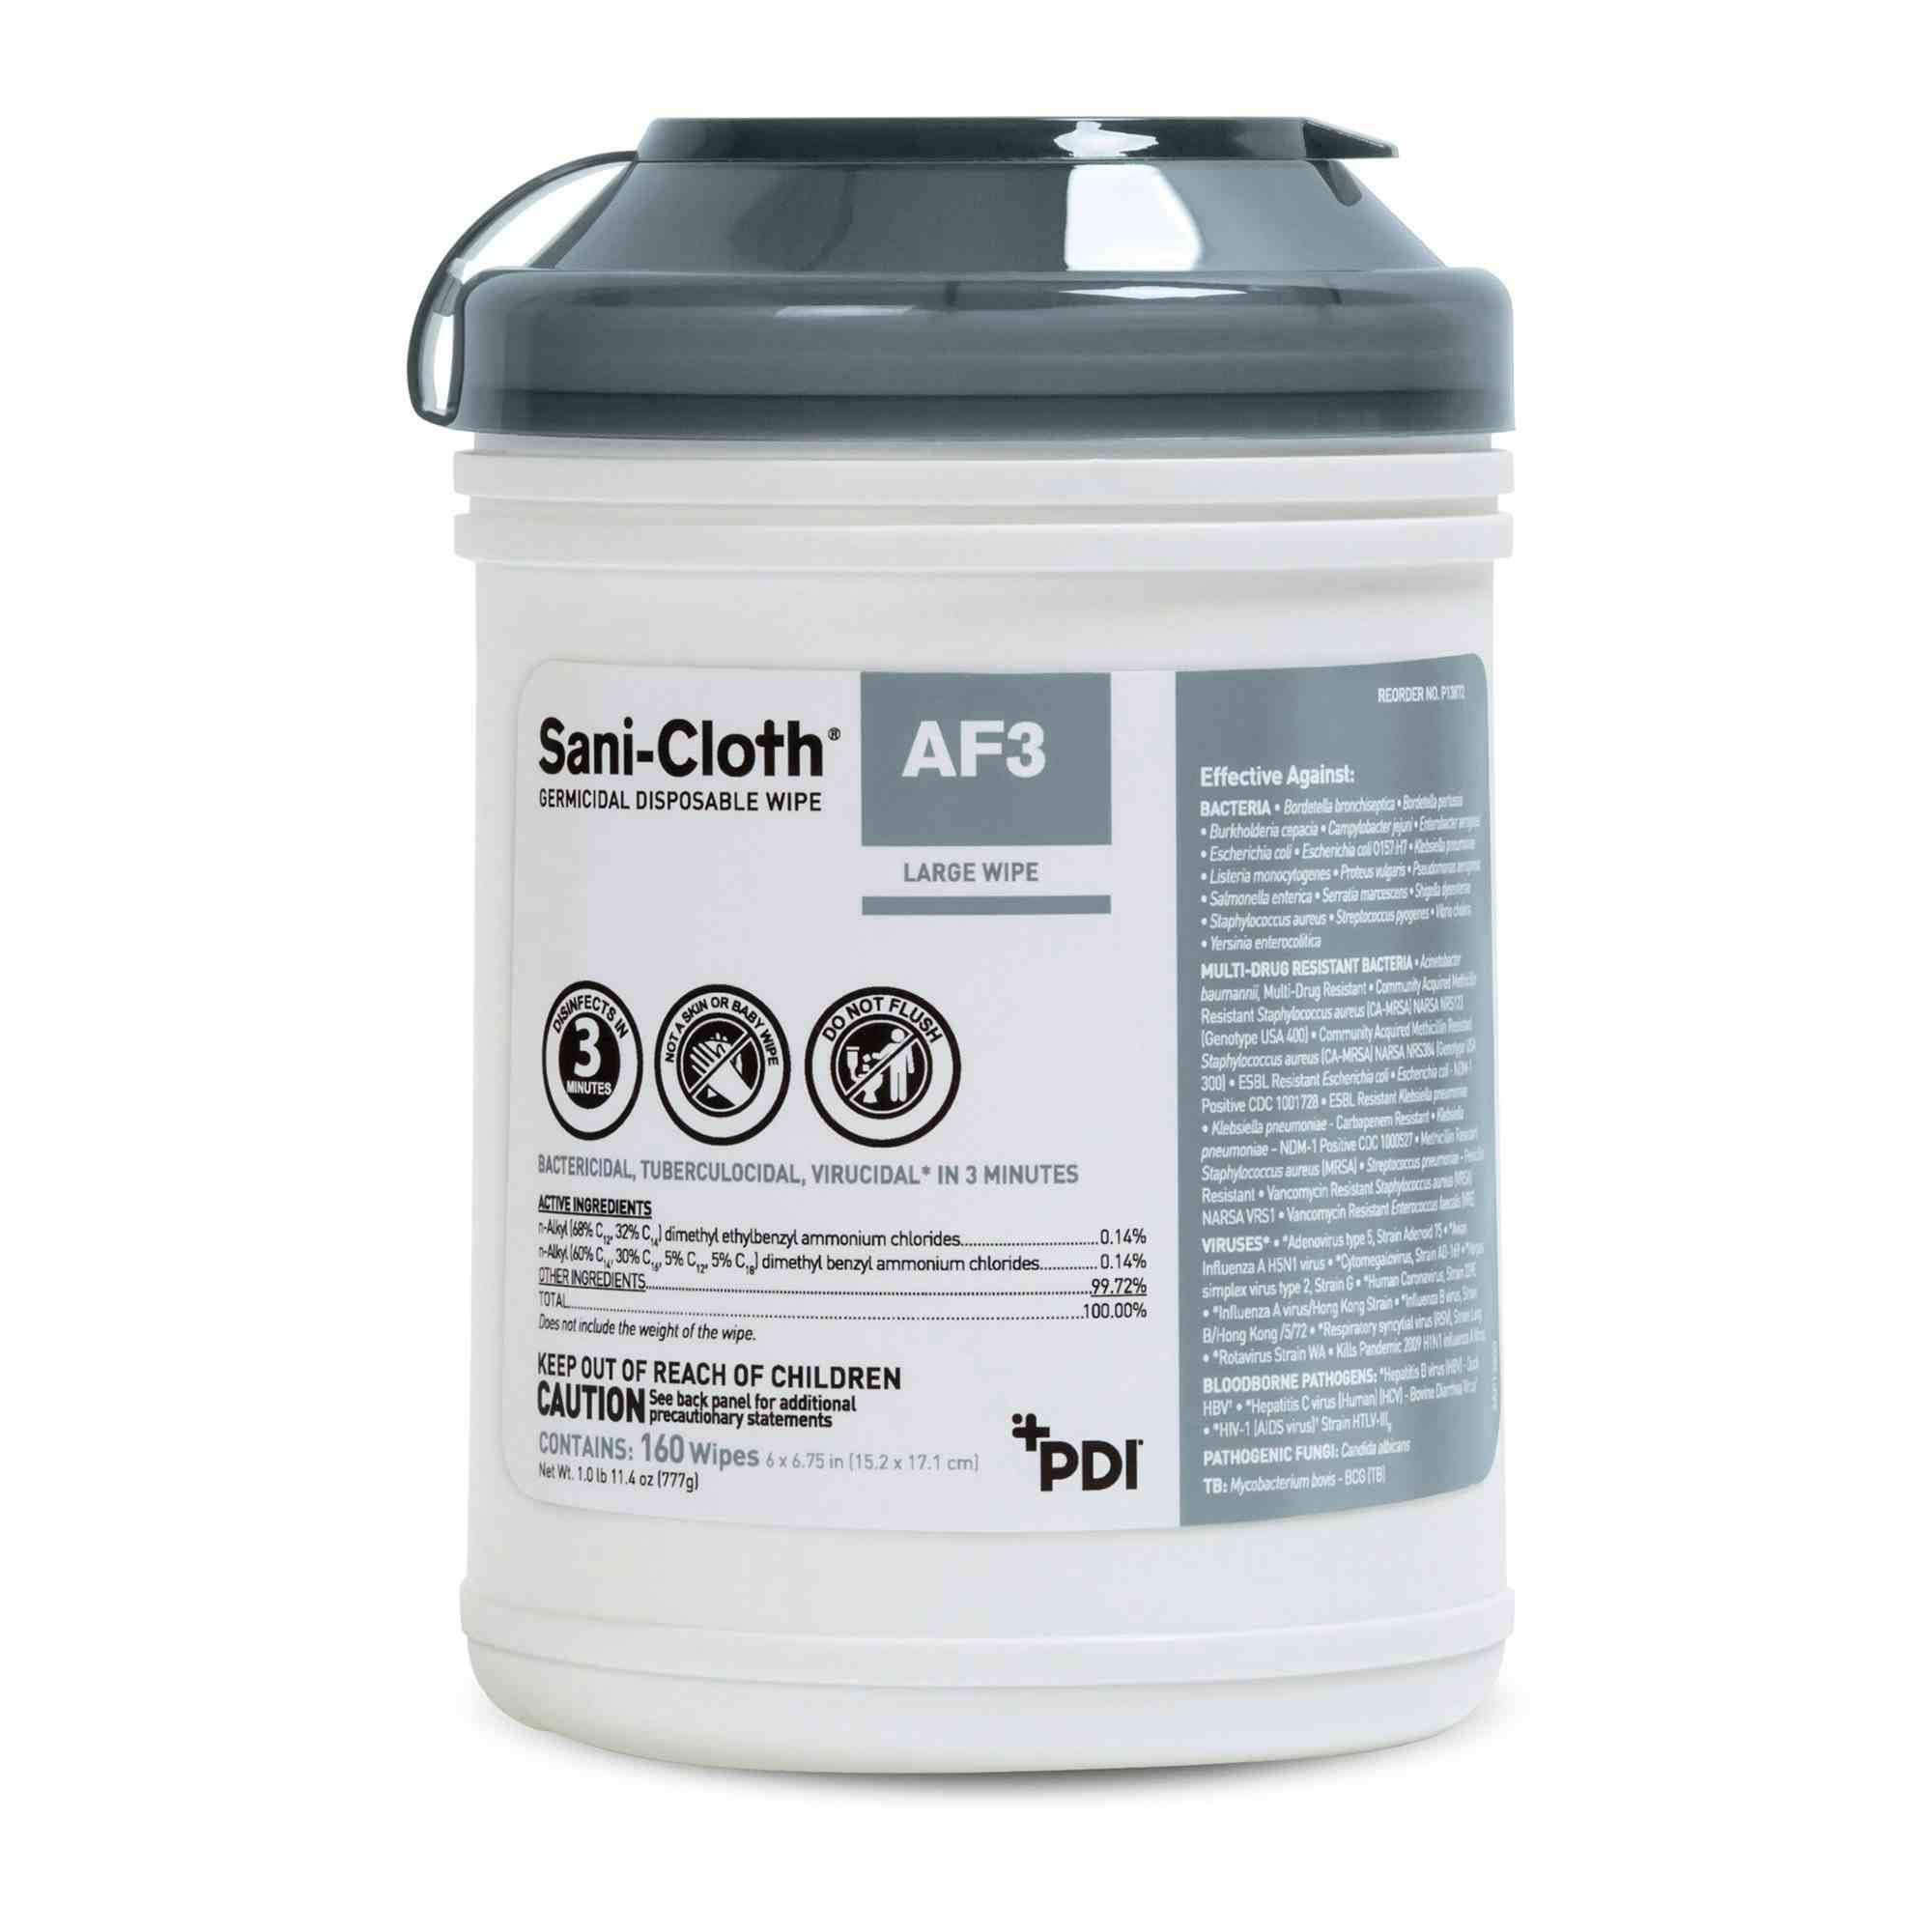 Sani-Cloth AF3 Surface Disinfectant Cleaner Wipe, 6 x 6-3/4", Large Canister, P13872, 1 Canister